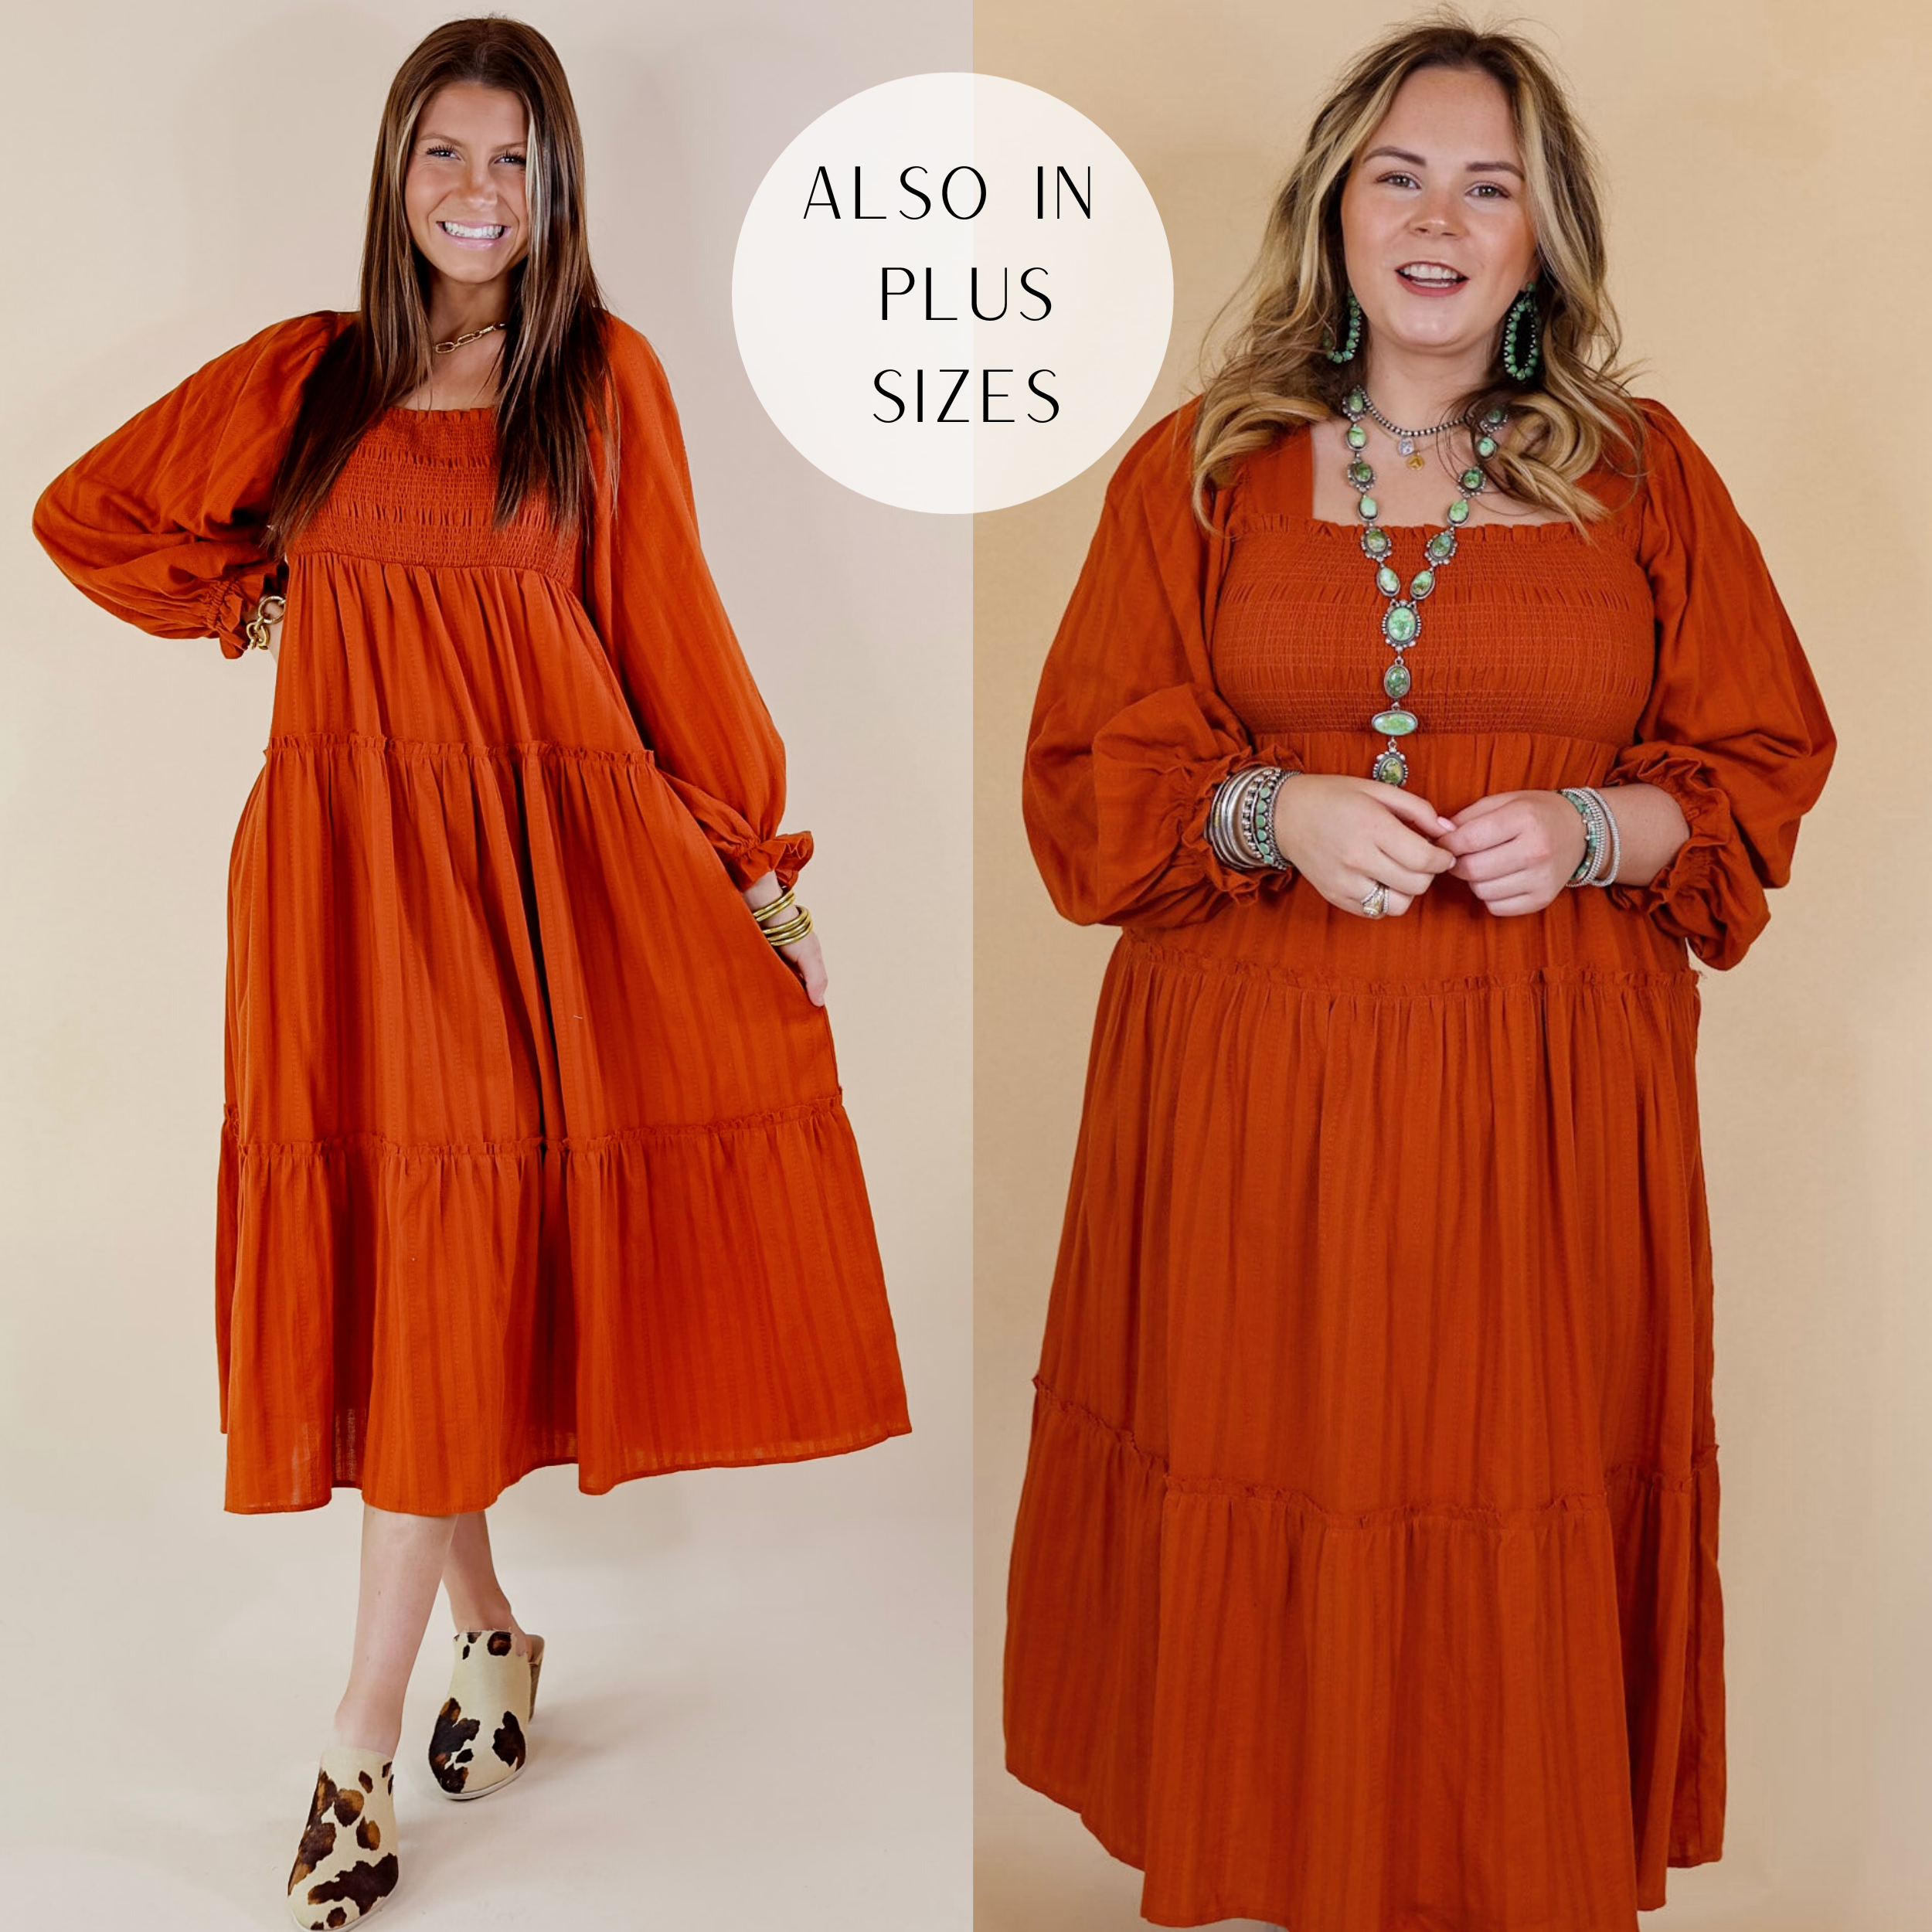 Model is wearing a long sleeve, tiered, dress with a square neckline in rust orange. Model has this dress paired with boots and turquoise jewelry. Background is solid tan.